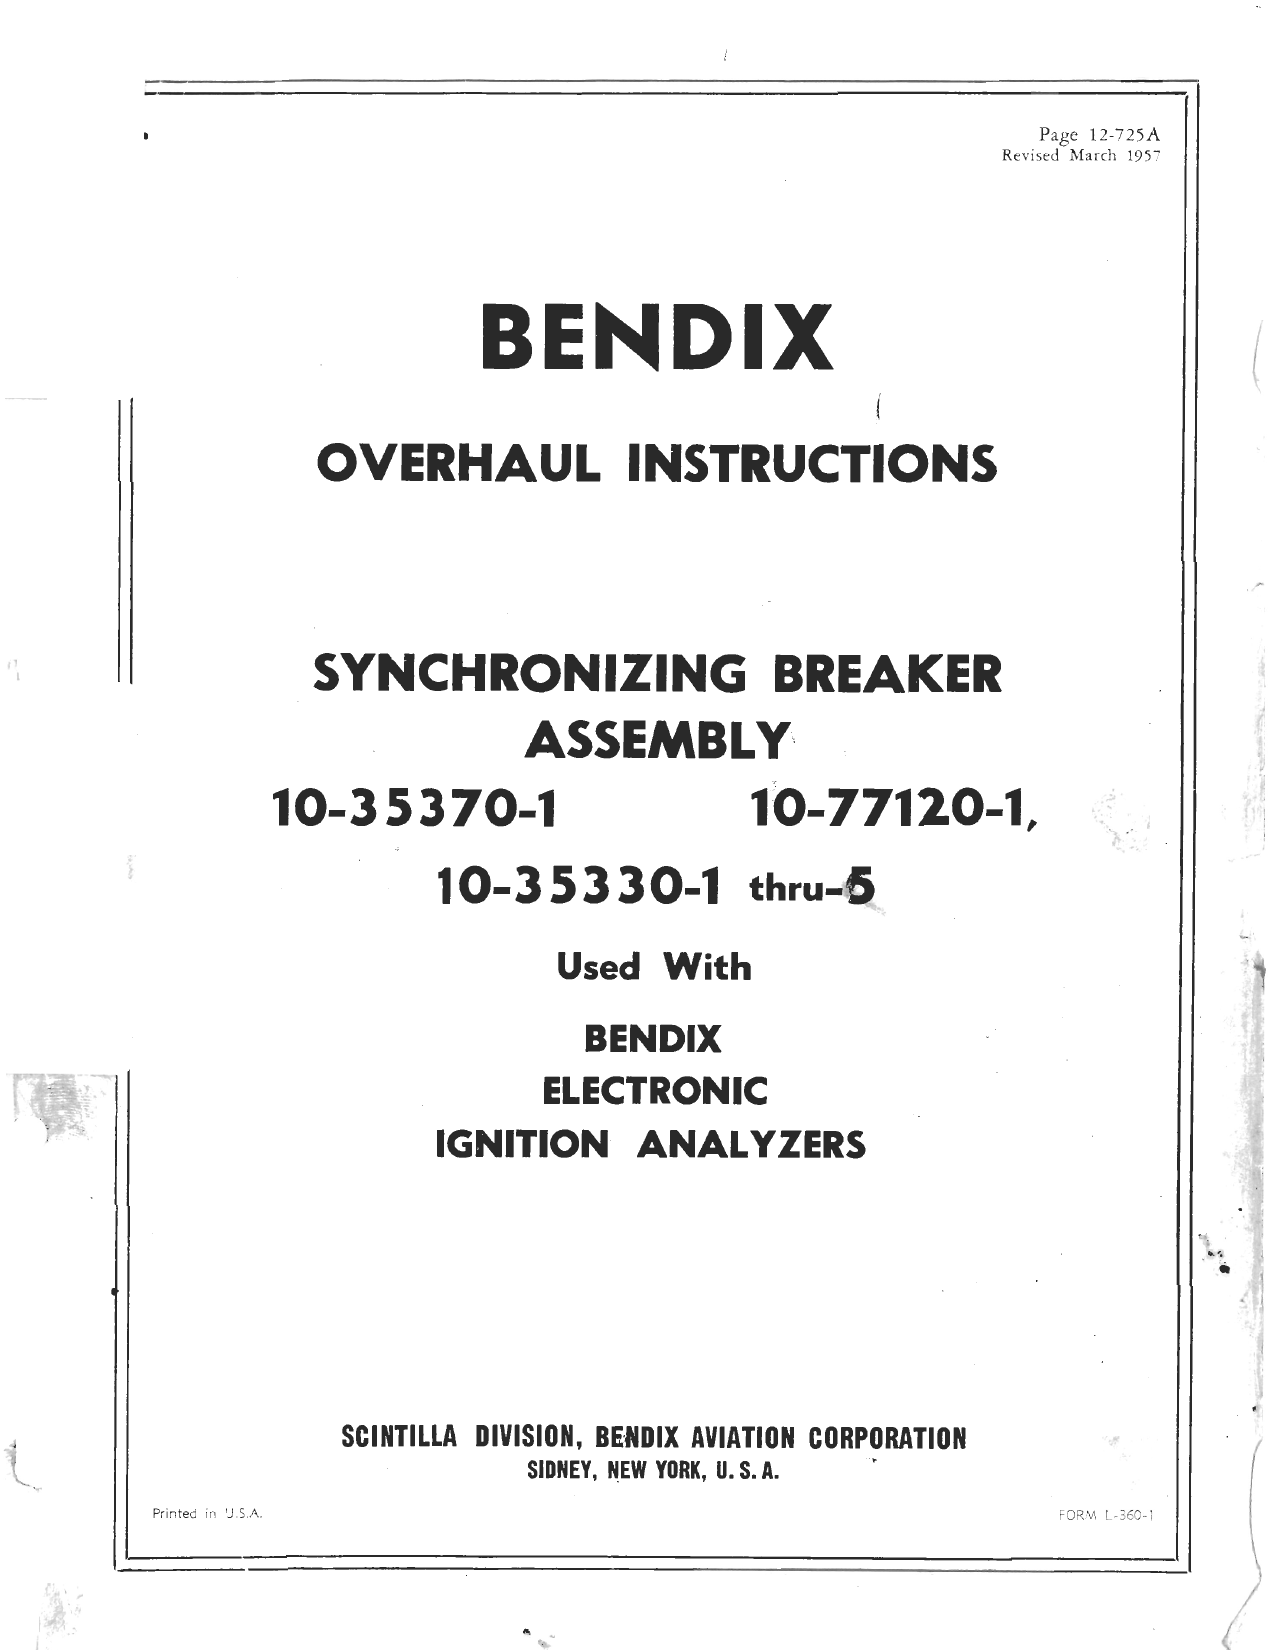 Sample page 1 from AirCorps Library document: Overhaul Instructions for Synchronizing Breaker Assembly - Parts 10-35370-1, 10-77120-1, and 10-35330-1 thru -5